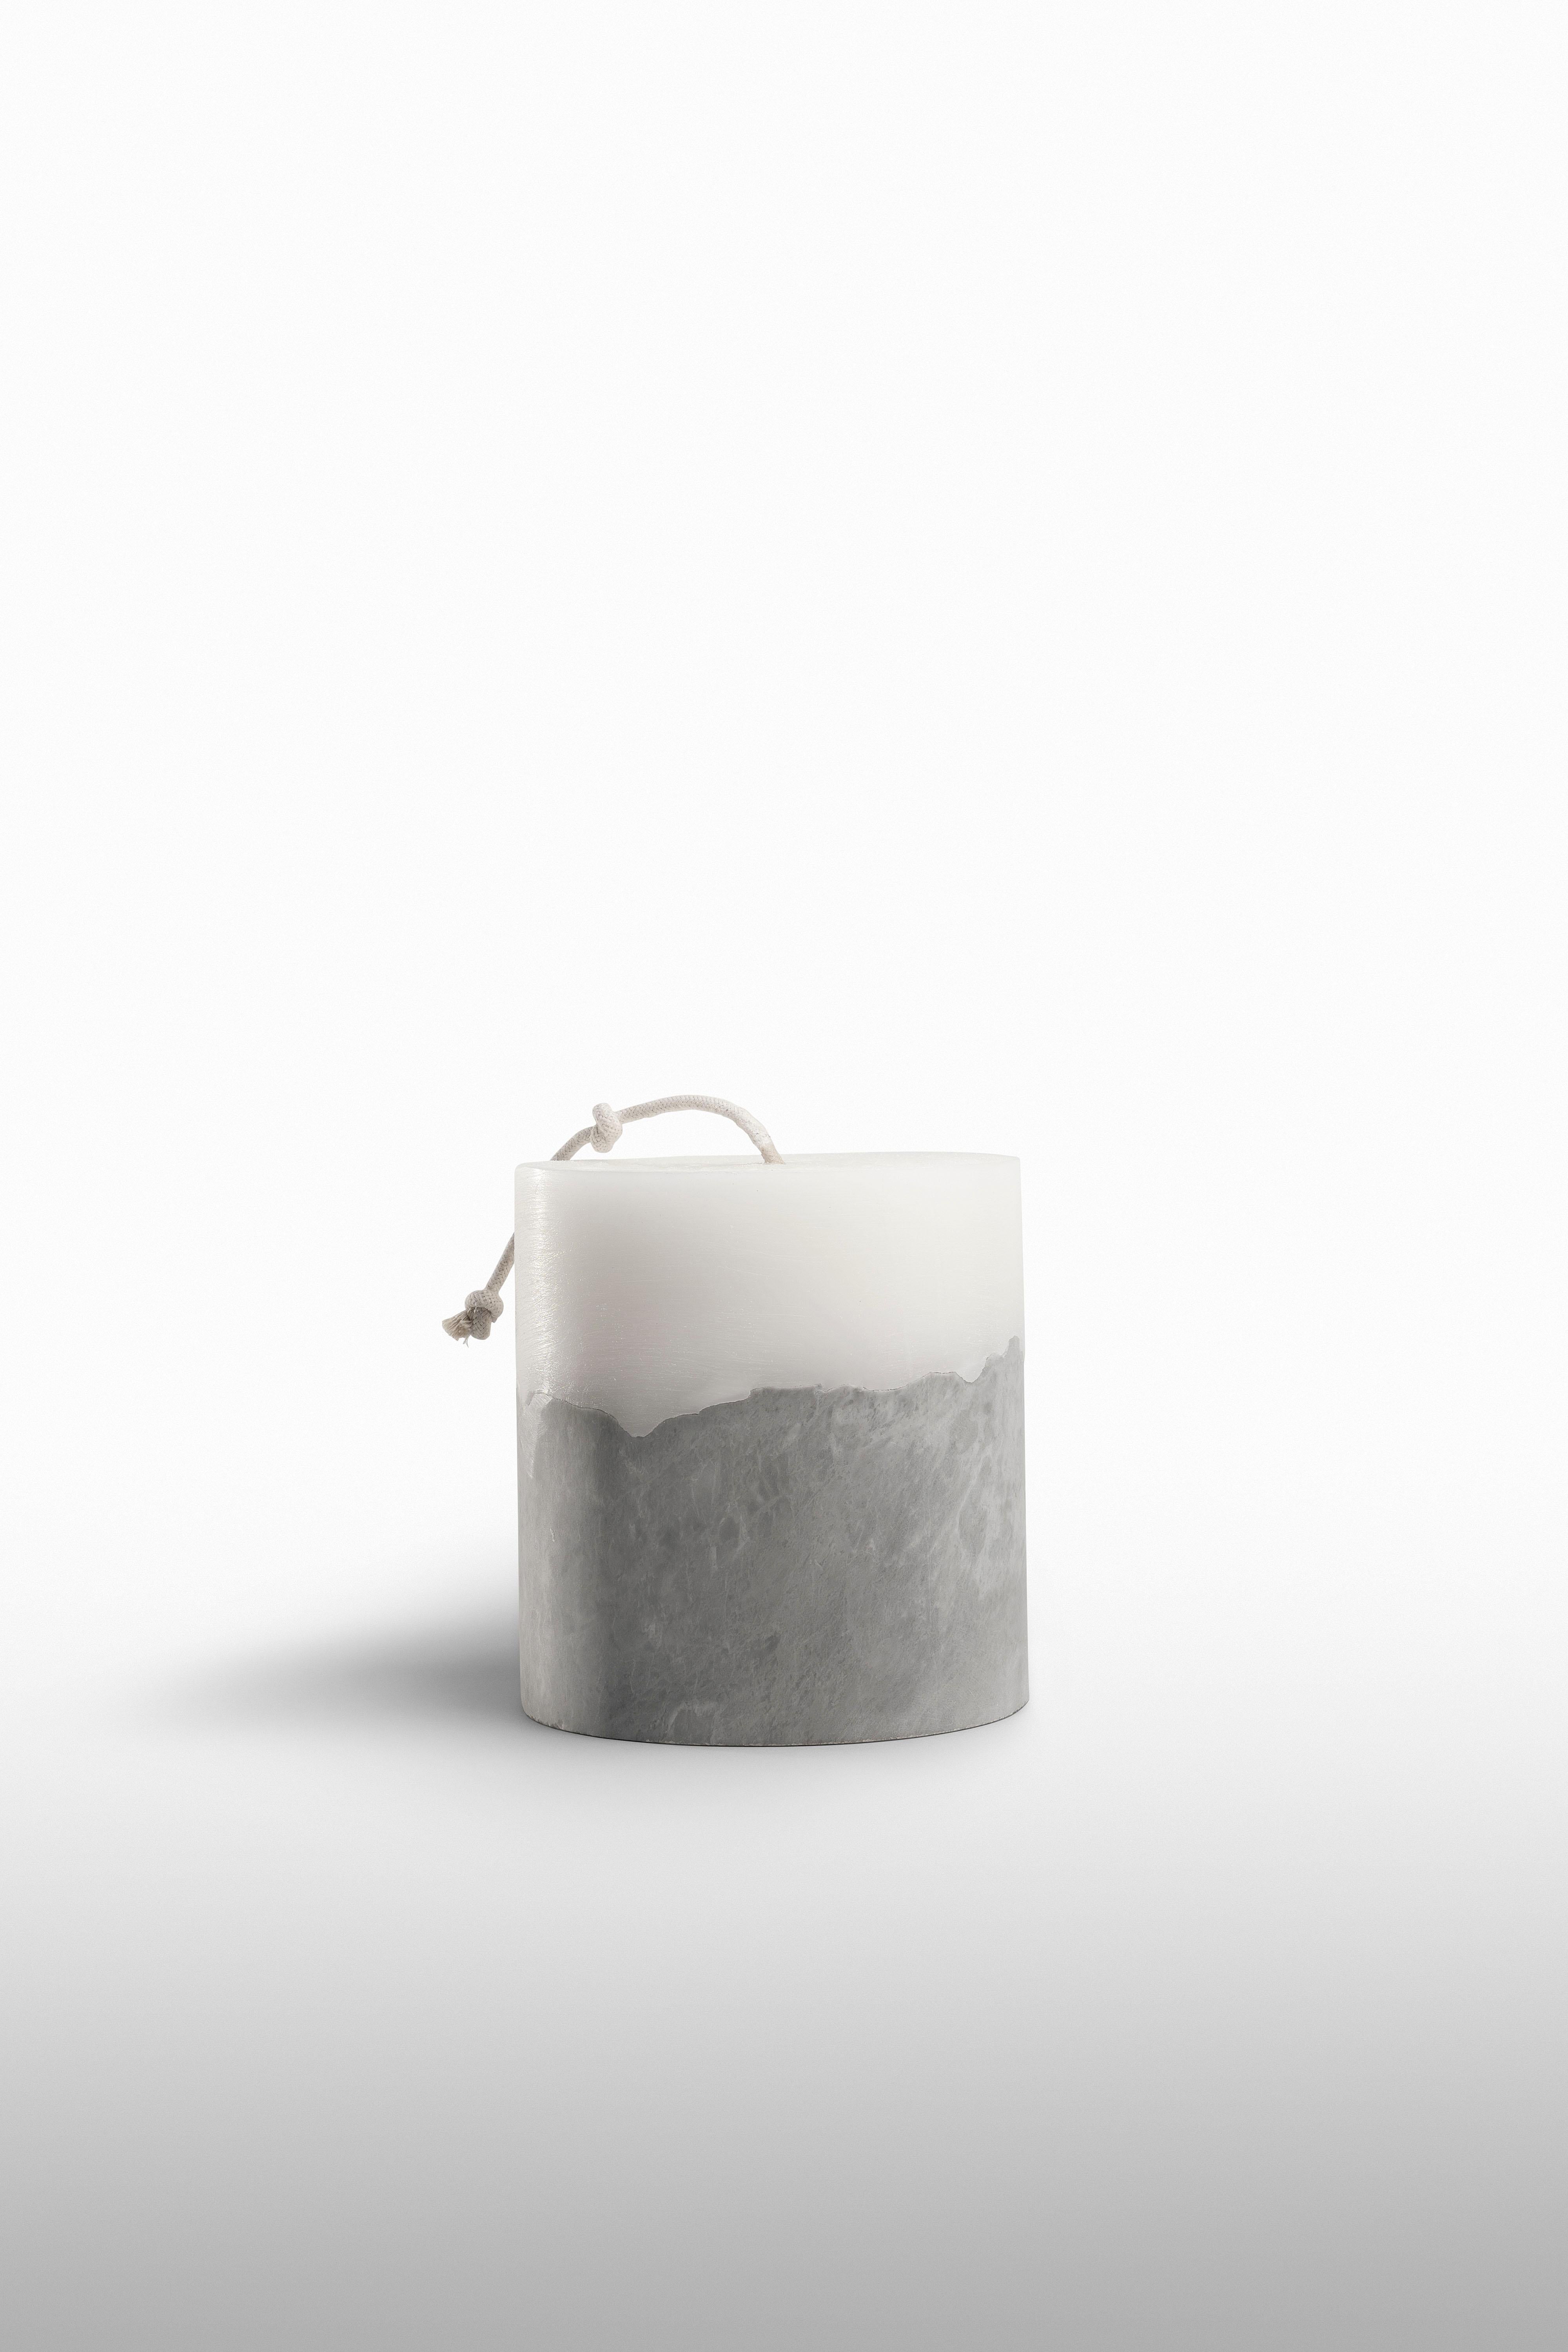 Not just a candle, but a piece of furniture with a strong material meaning. Flato, designed by Emanuel Gargano, is a handcrafted collection, made in marble and wax, wholly made in Italy. Each candle is different from one another in materials and